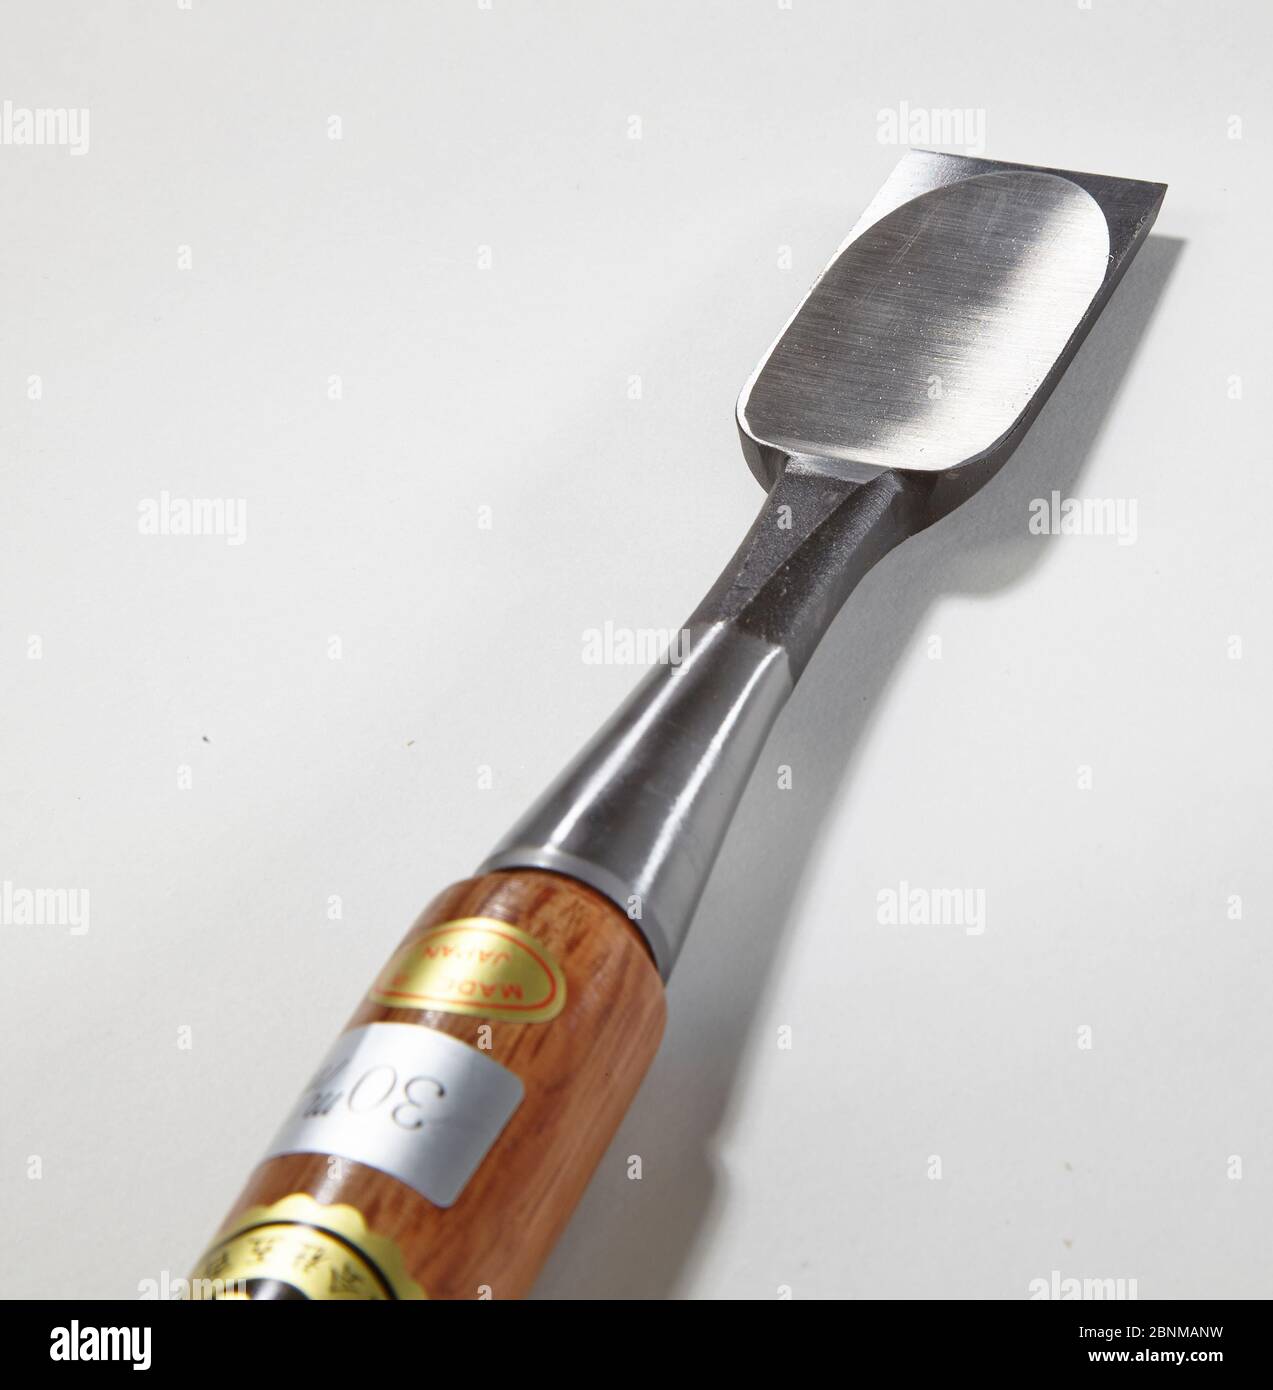 Japanese wood chisel, series of woodworking tools from Japan, Japanese woodworking tool, detailed front view on white Stock Photo